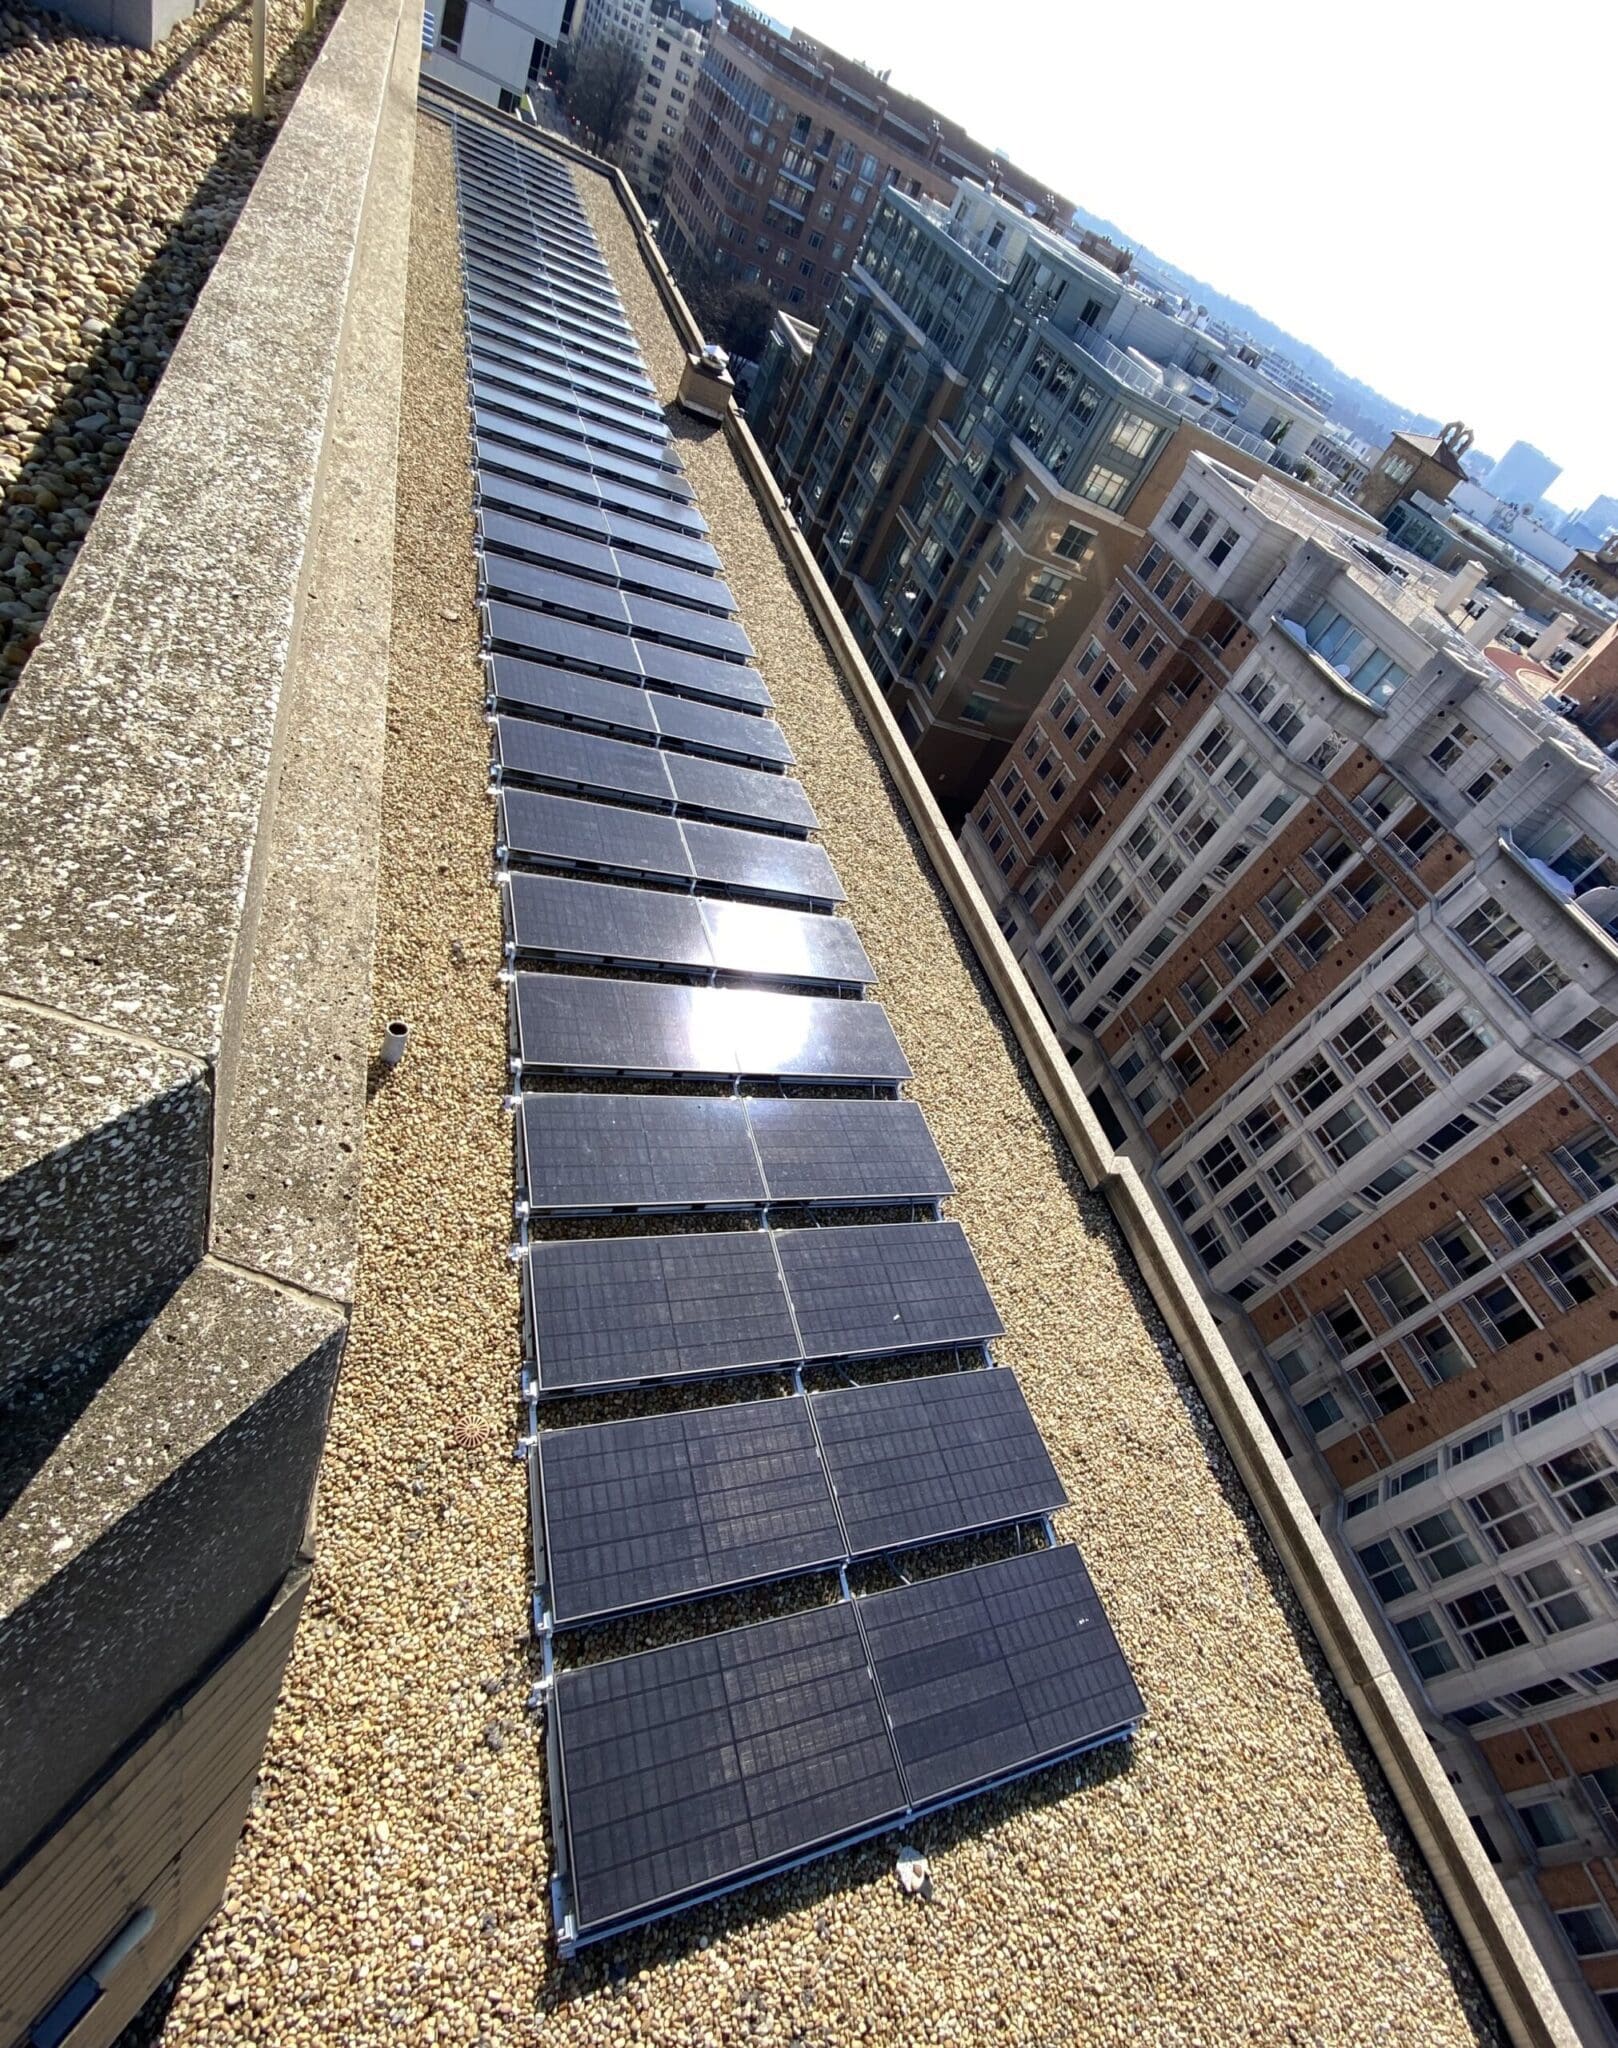 Georgetown hotel in Washington DC with a rooftop solar array